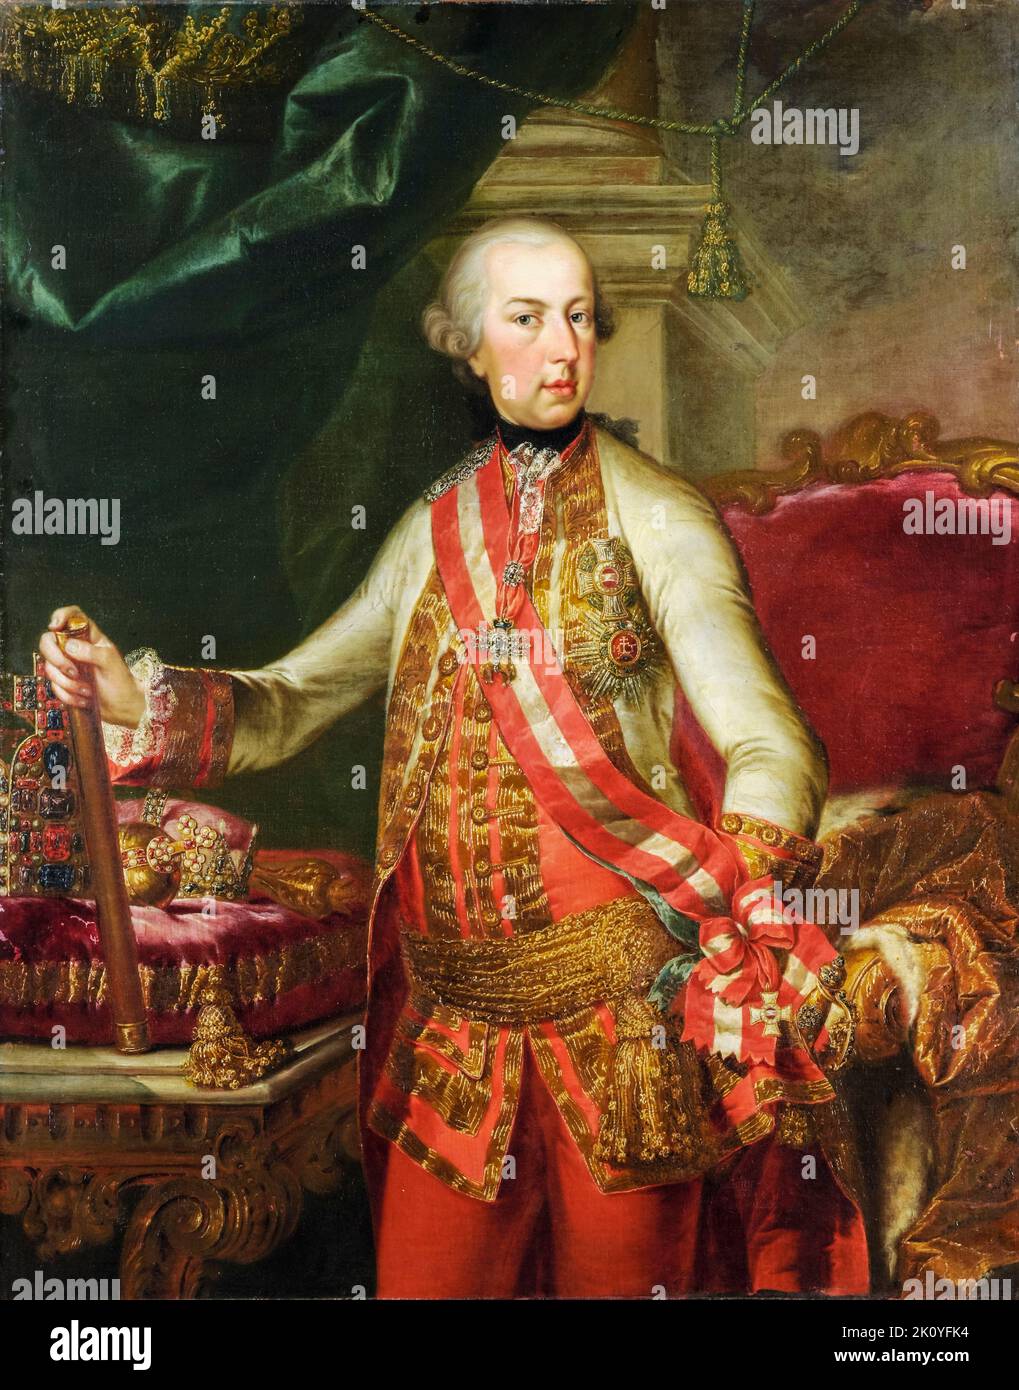 Joseph II (1741–1790), Holy Roman Emperor, Archduke of Austria (1765-1790), portrait painting in oil on canvas by Johann Nikolaus Grooth, before 1784 Stock Photo